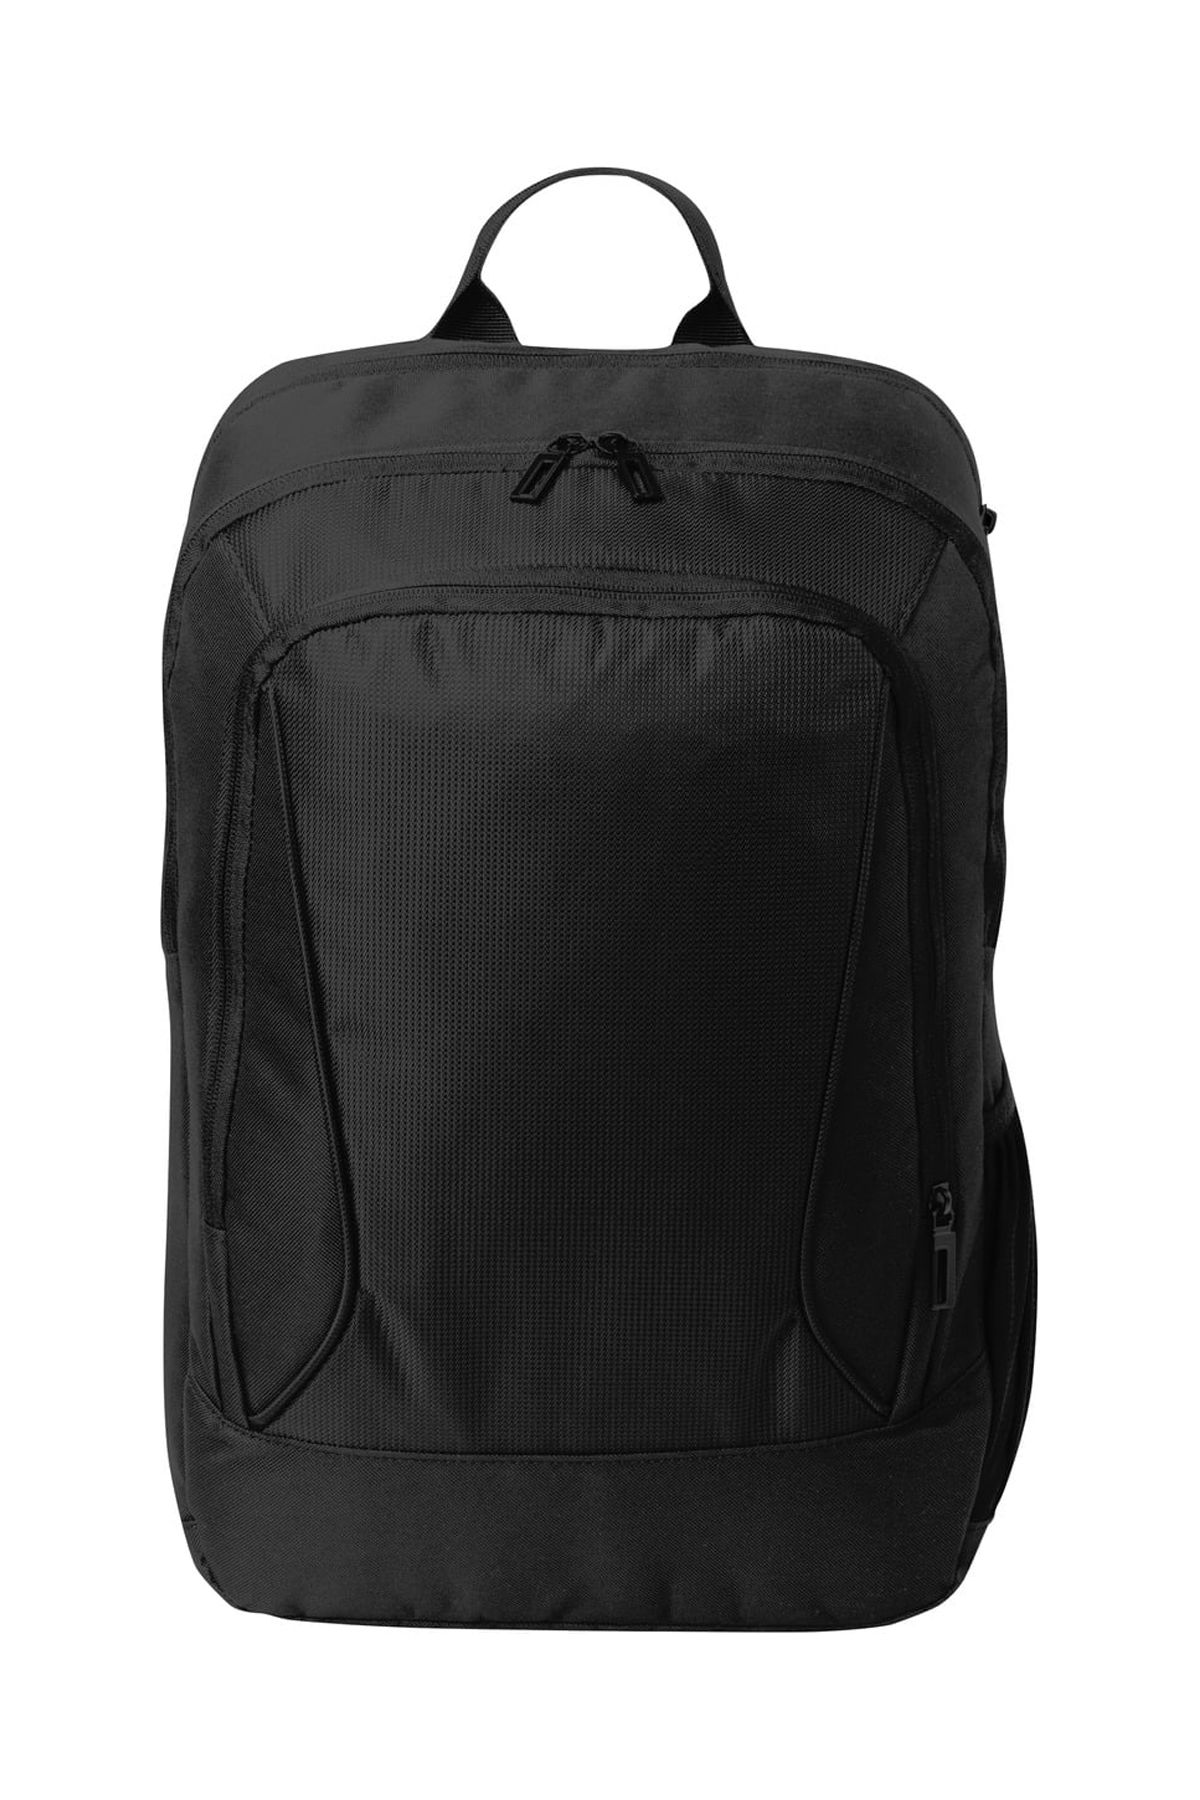 Port Authority Adult Unisex Plain Backpack Black One Size Fits All - image 1 of 3